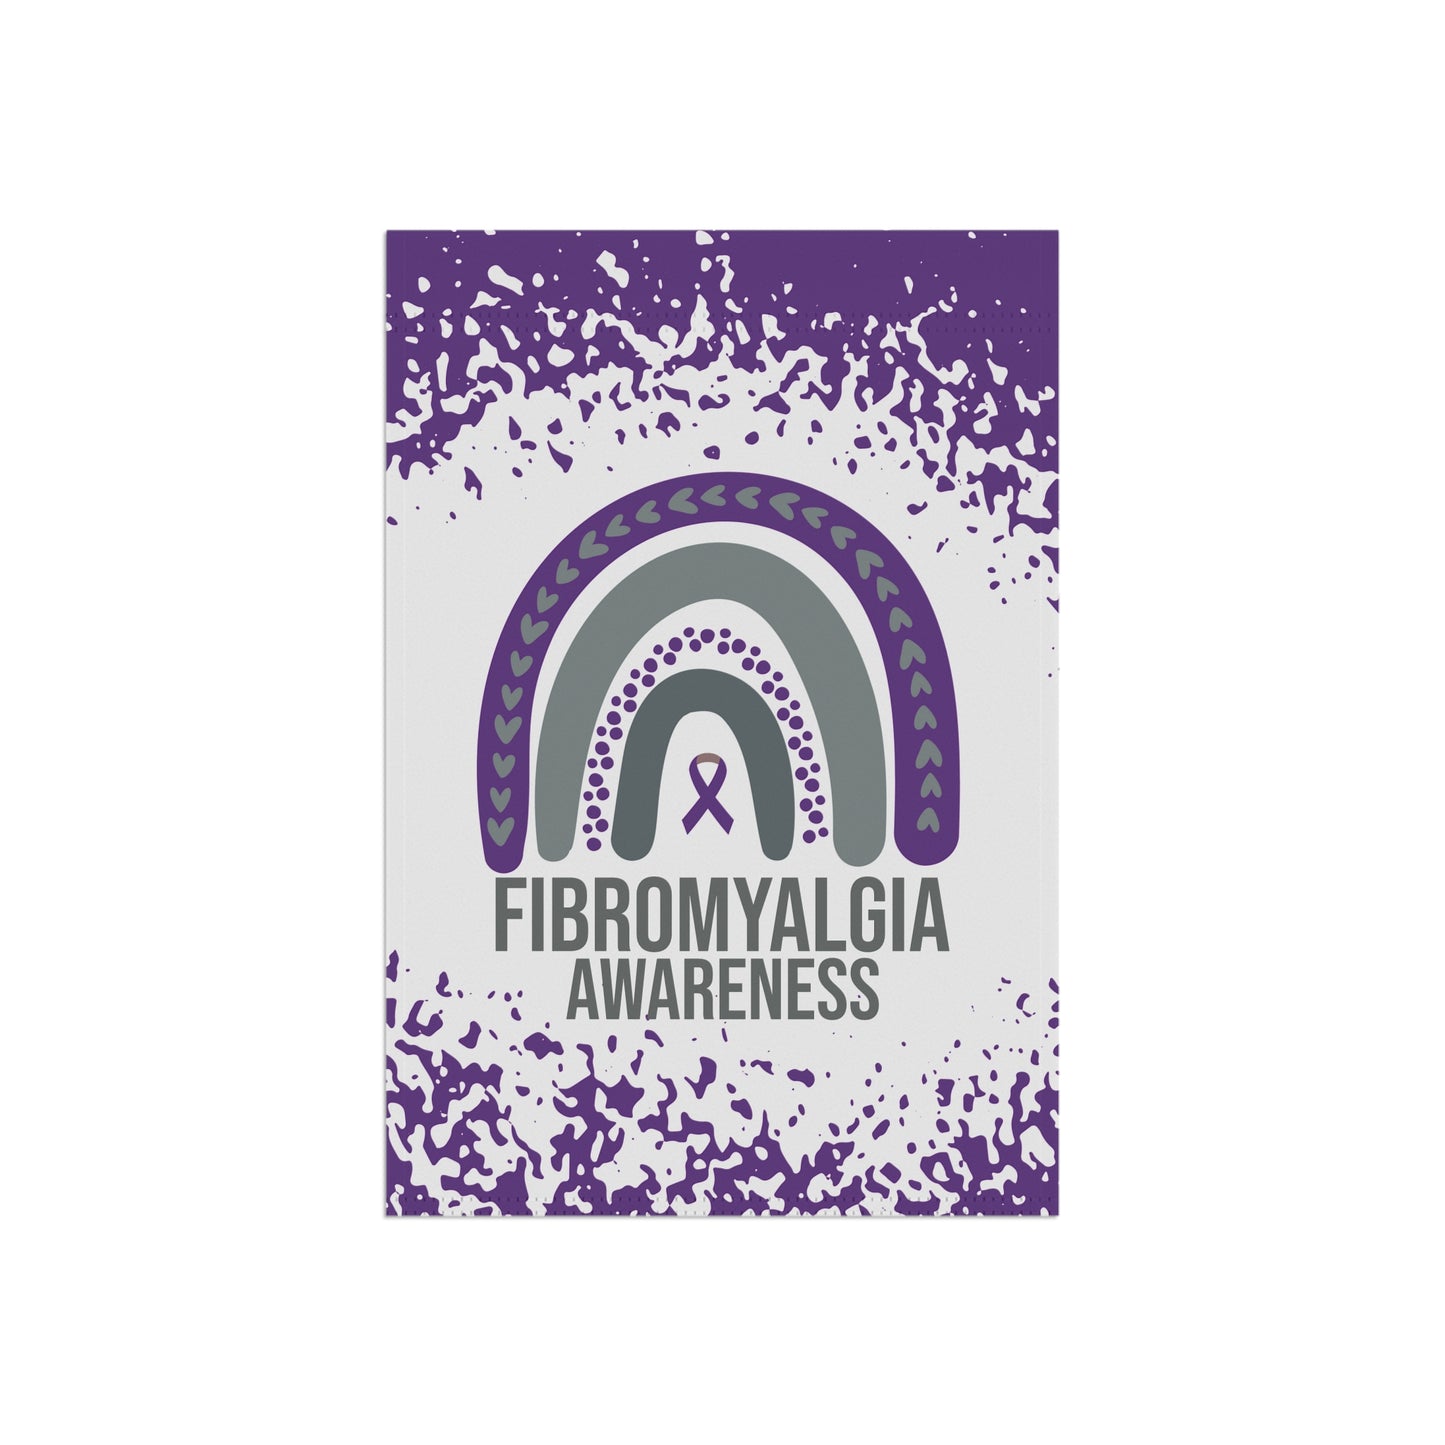 Fibromyalgia Awareness Garden Flag | Welcome Sign |  New Home | Decorative House Banner | Purple Awareness Ribbon  | Support